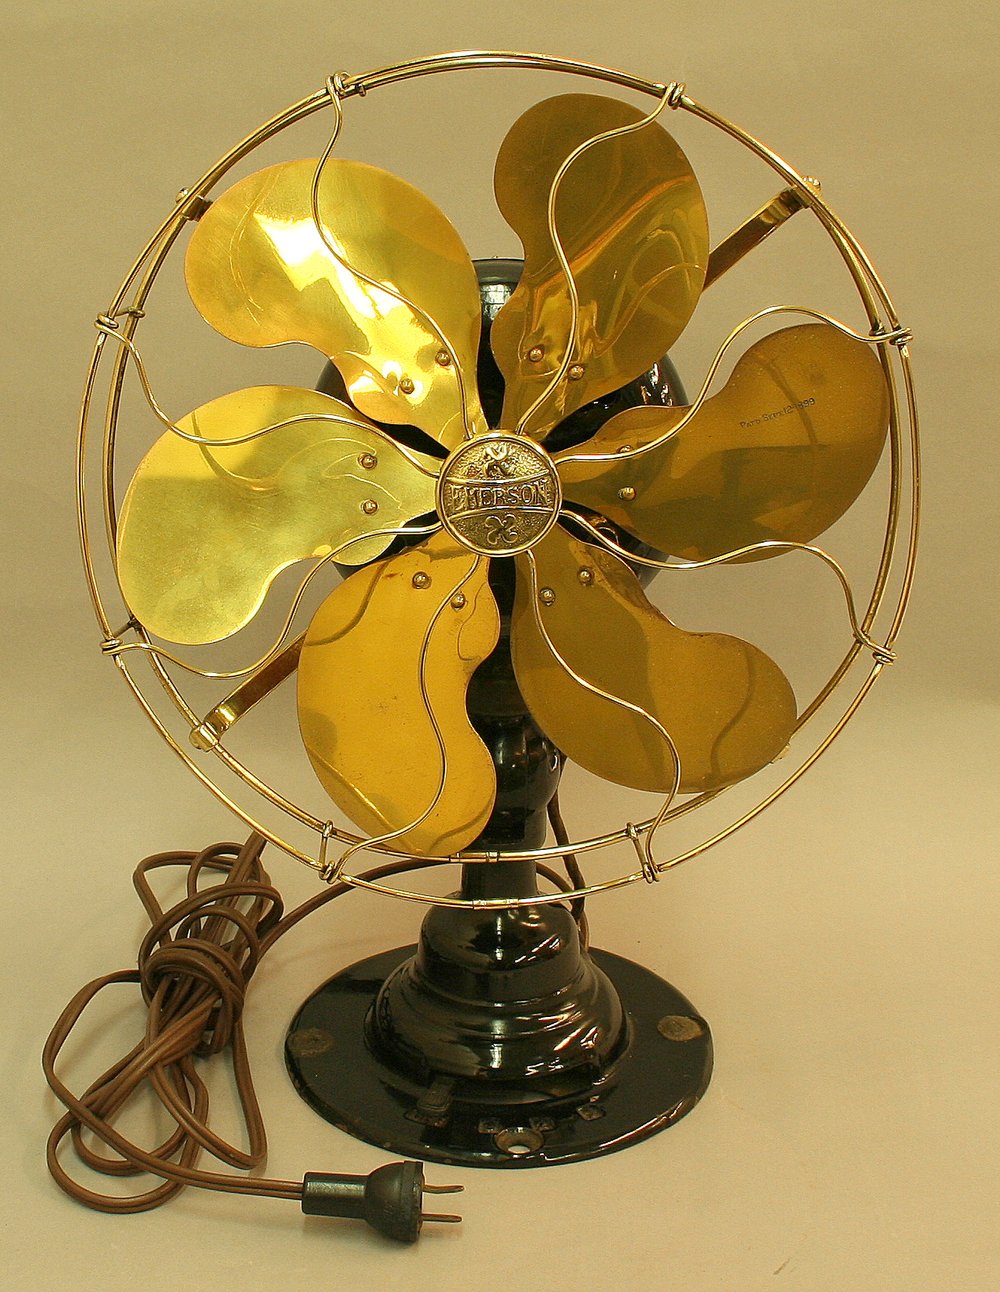 Electric_Oscillating_Table_Fan_by_Emerson.jpg